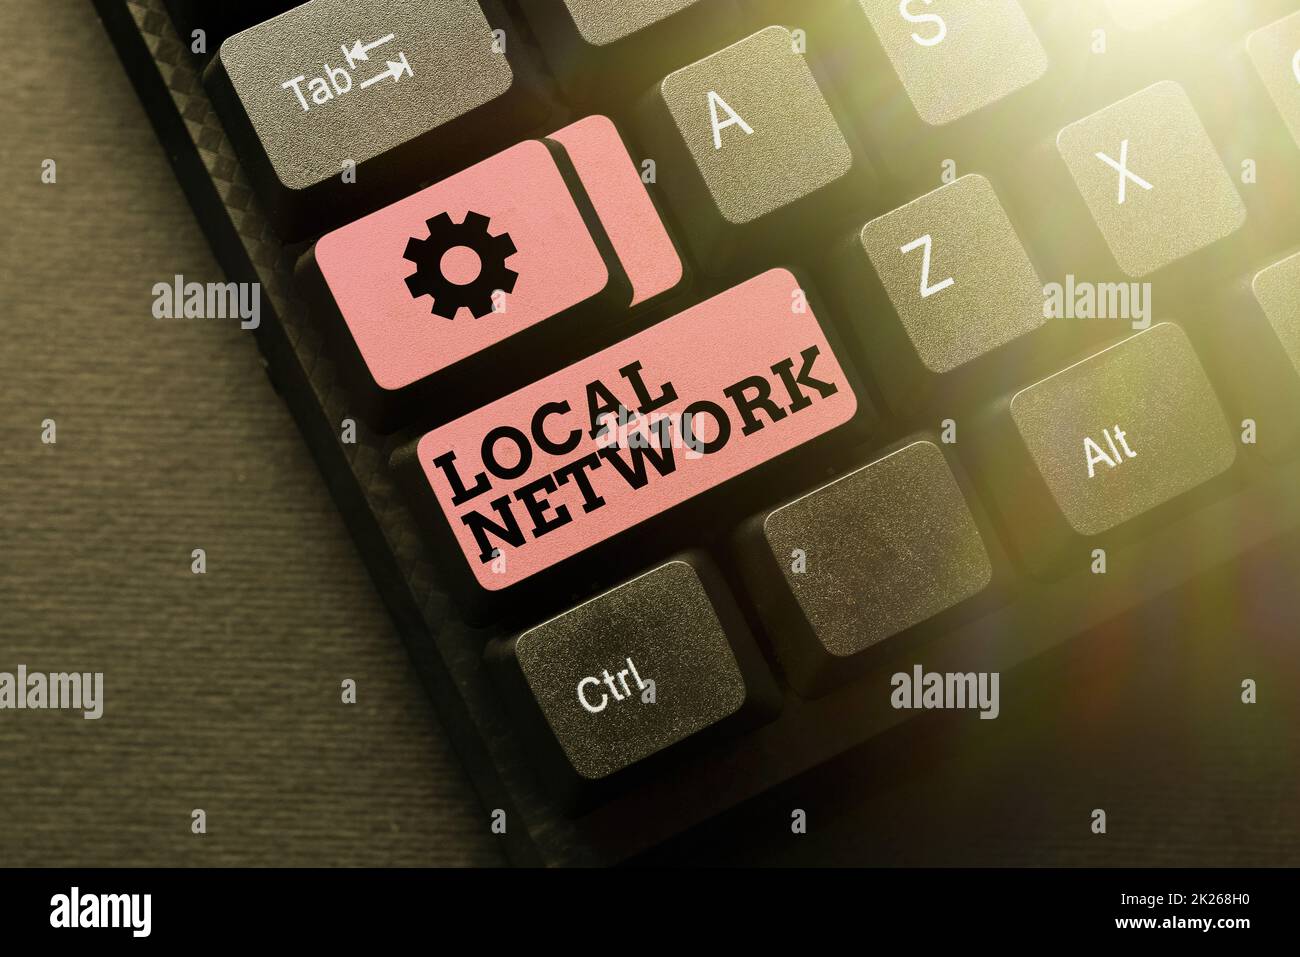 Conceptual caption Local Network. Business approach Intranet LAN Radio Waves DSL Boradband Switch Connection Editing And Retyping Report Spelling Errors, Typing Online Shop Inventory Stock Photo